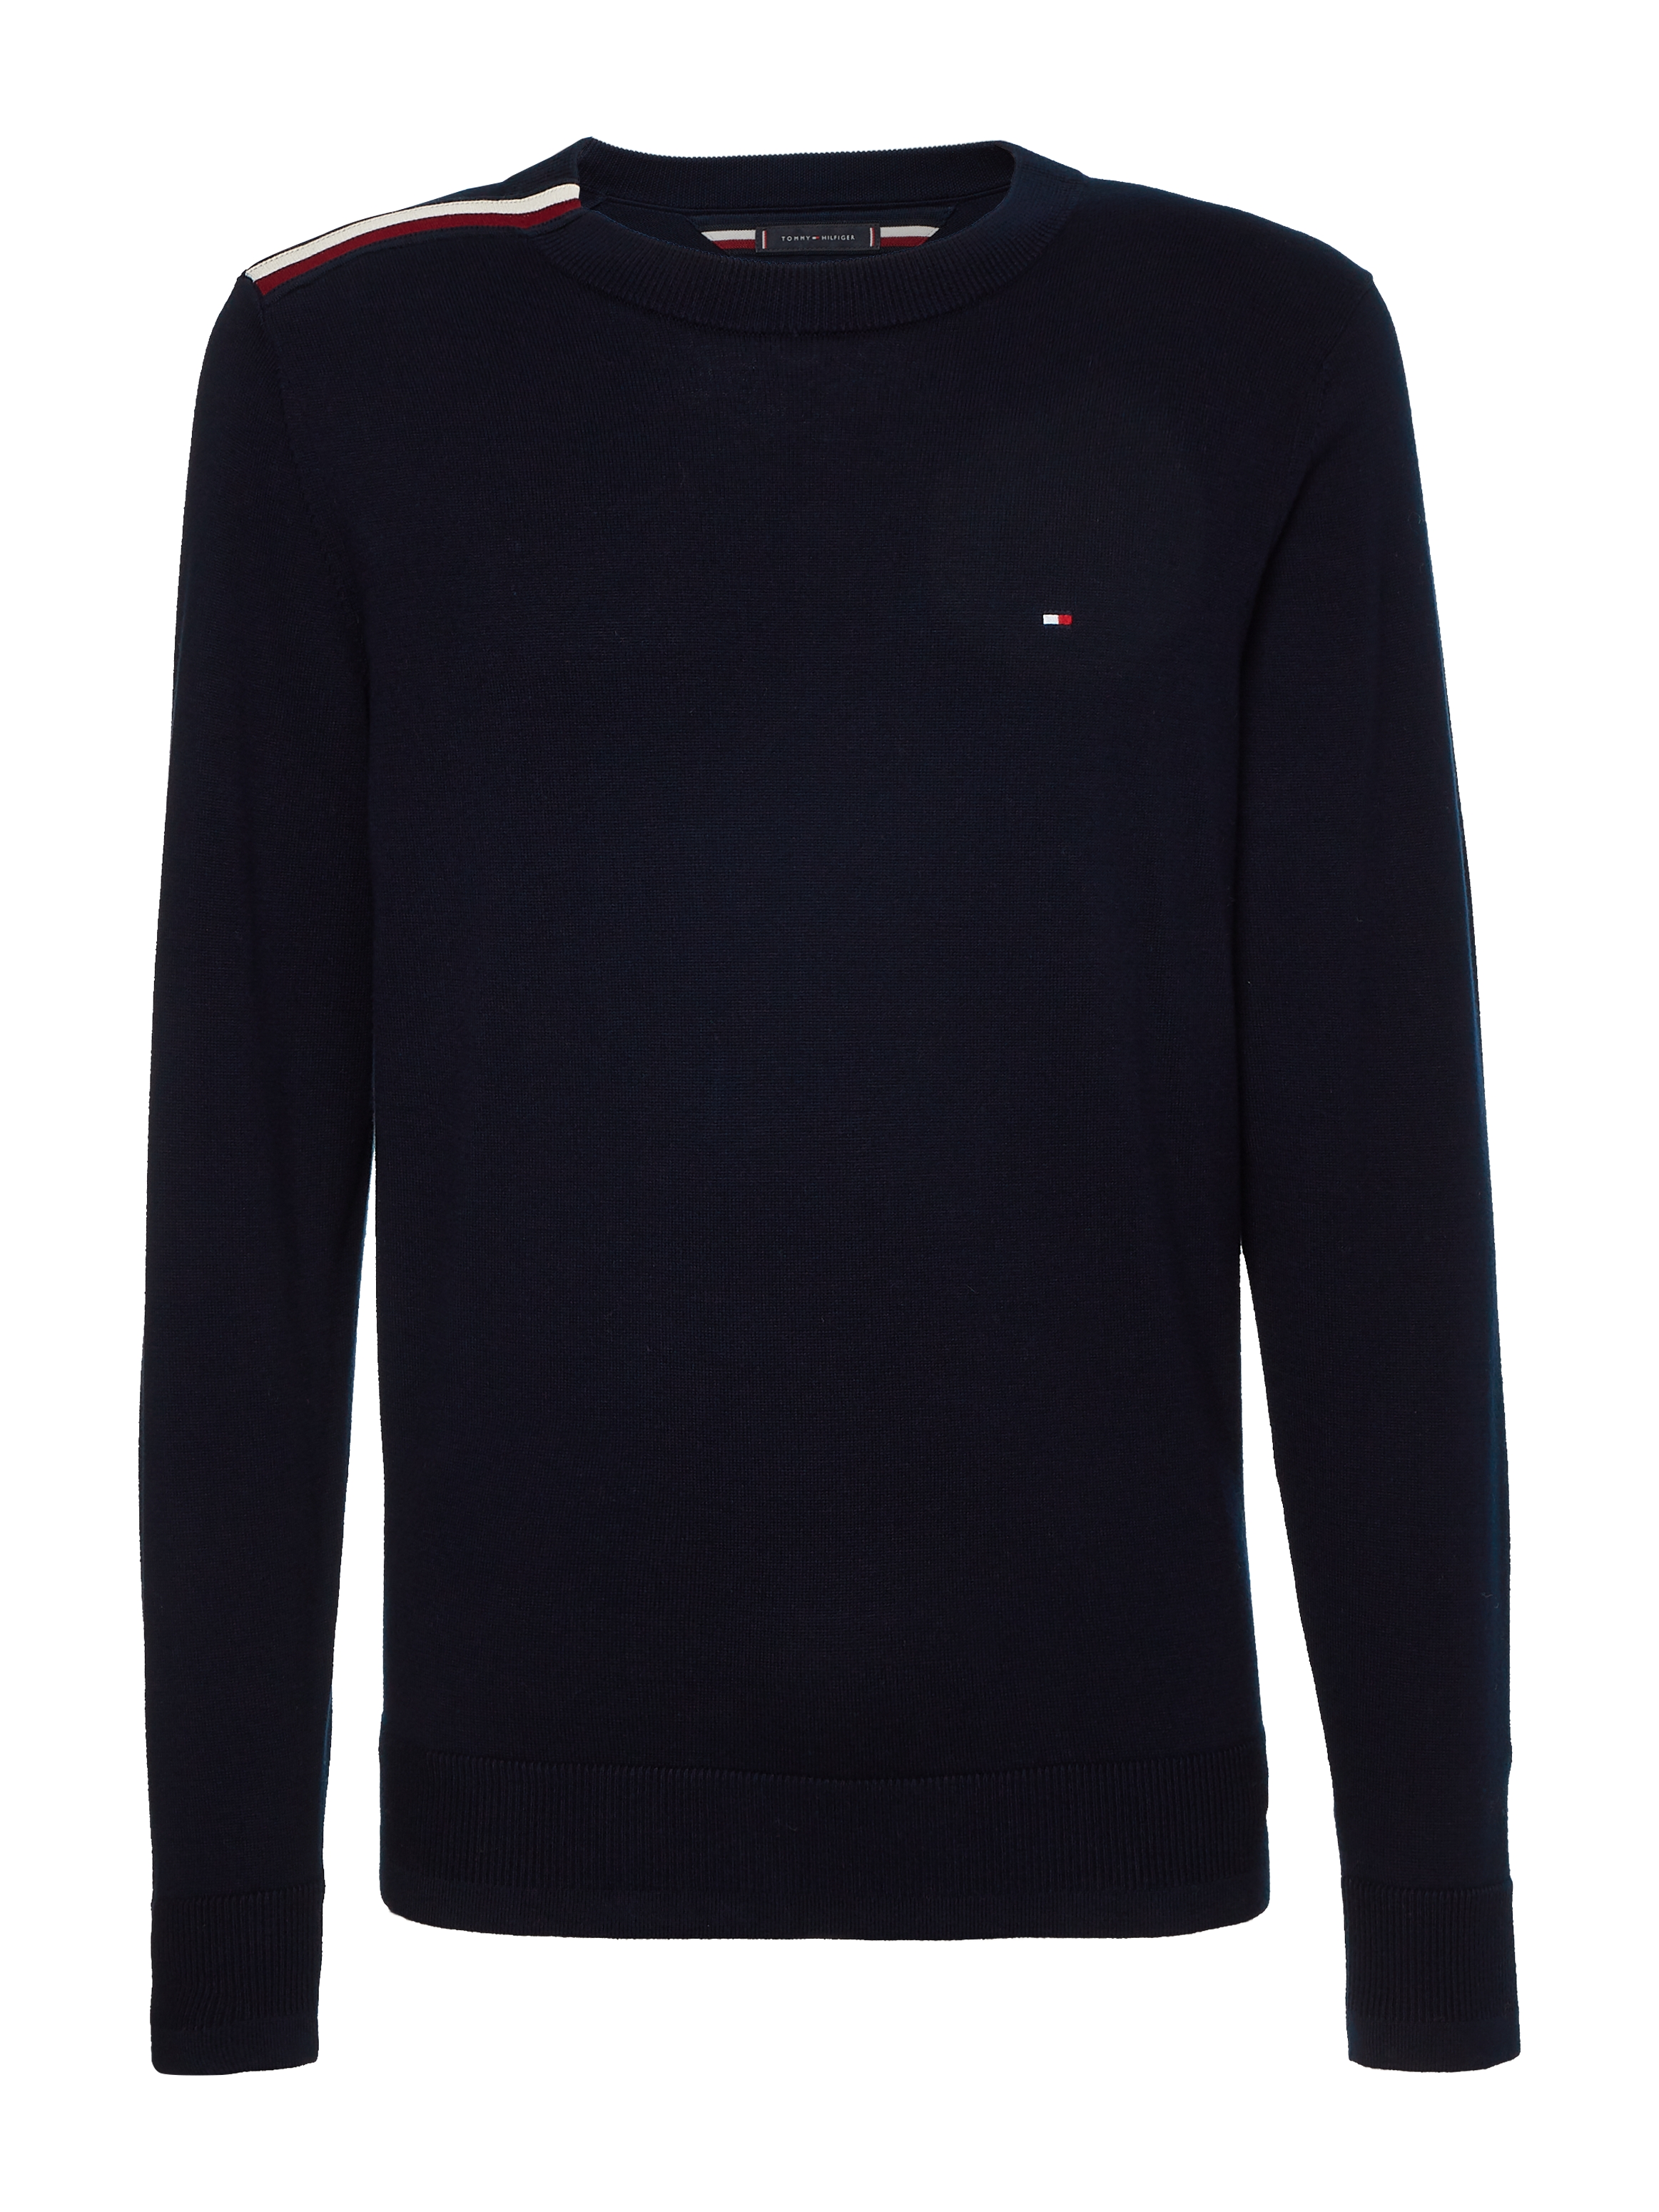 Tommy Hilfiger Sweater - GLOBAL STP PLACEMENT blue